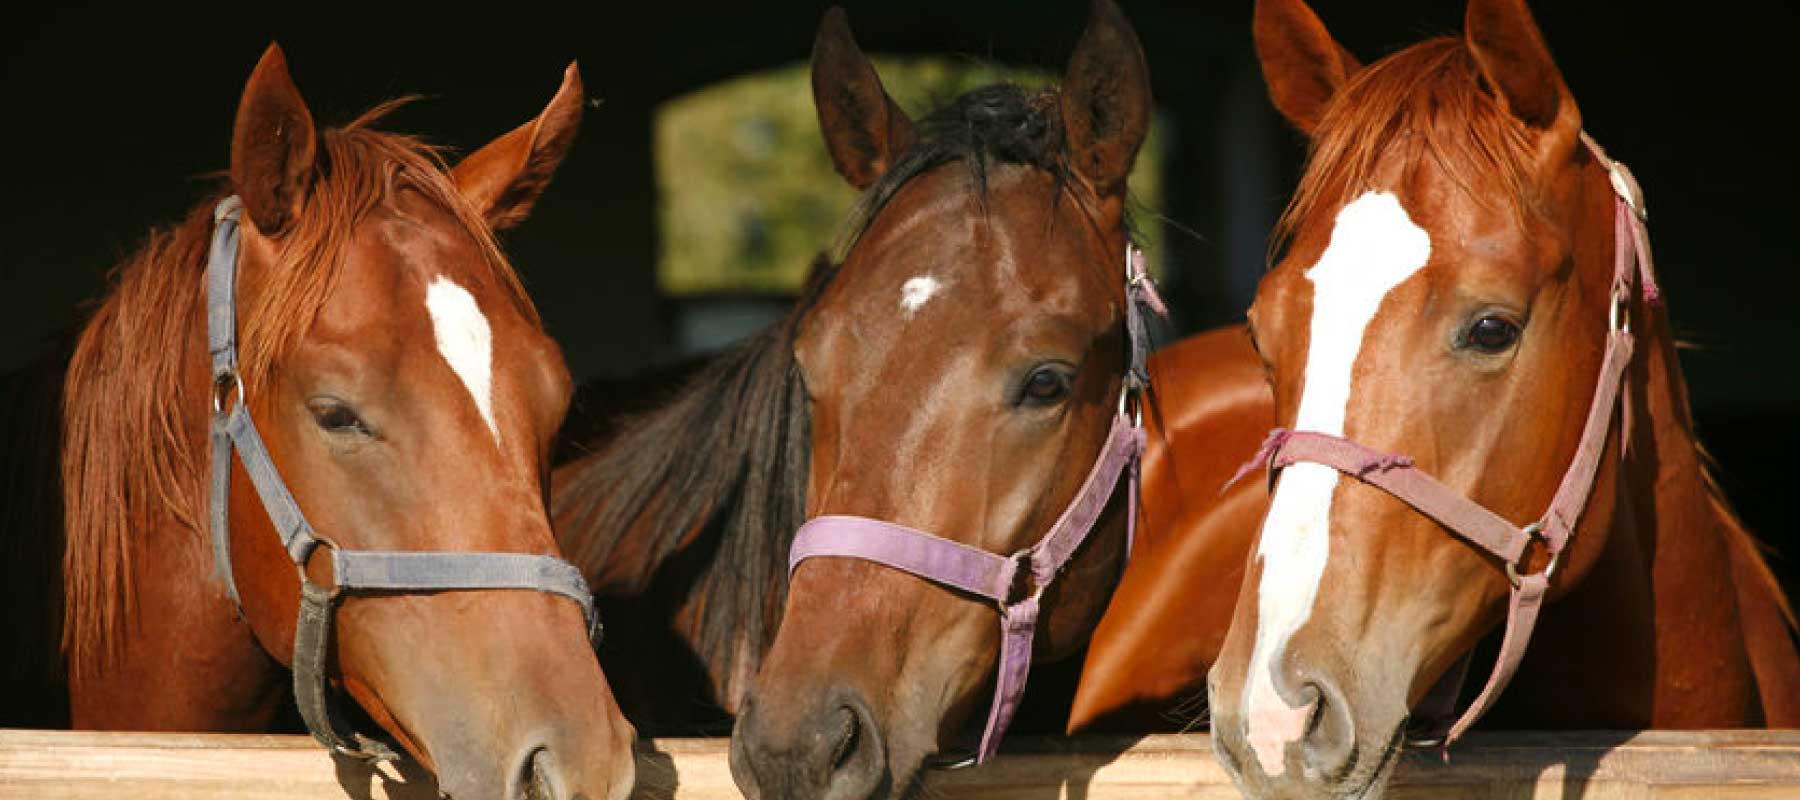 Image of three horses looking out a barn door